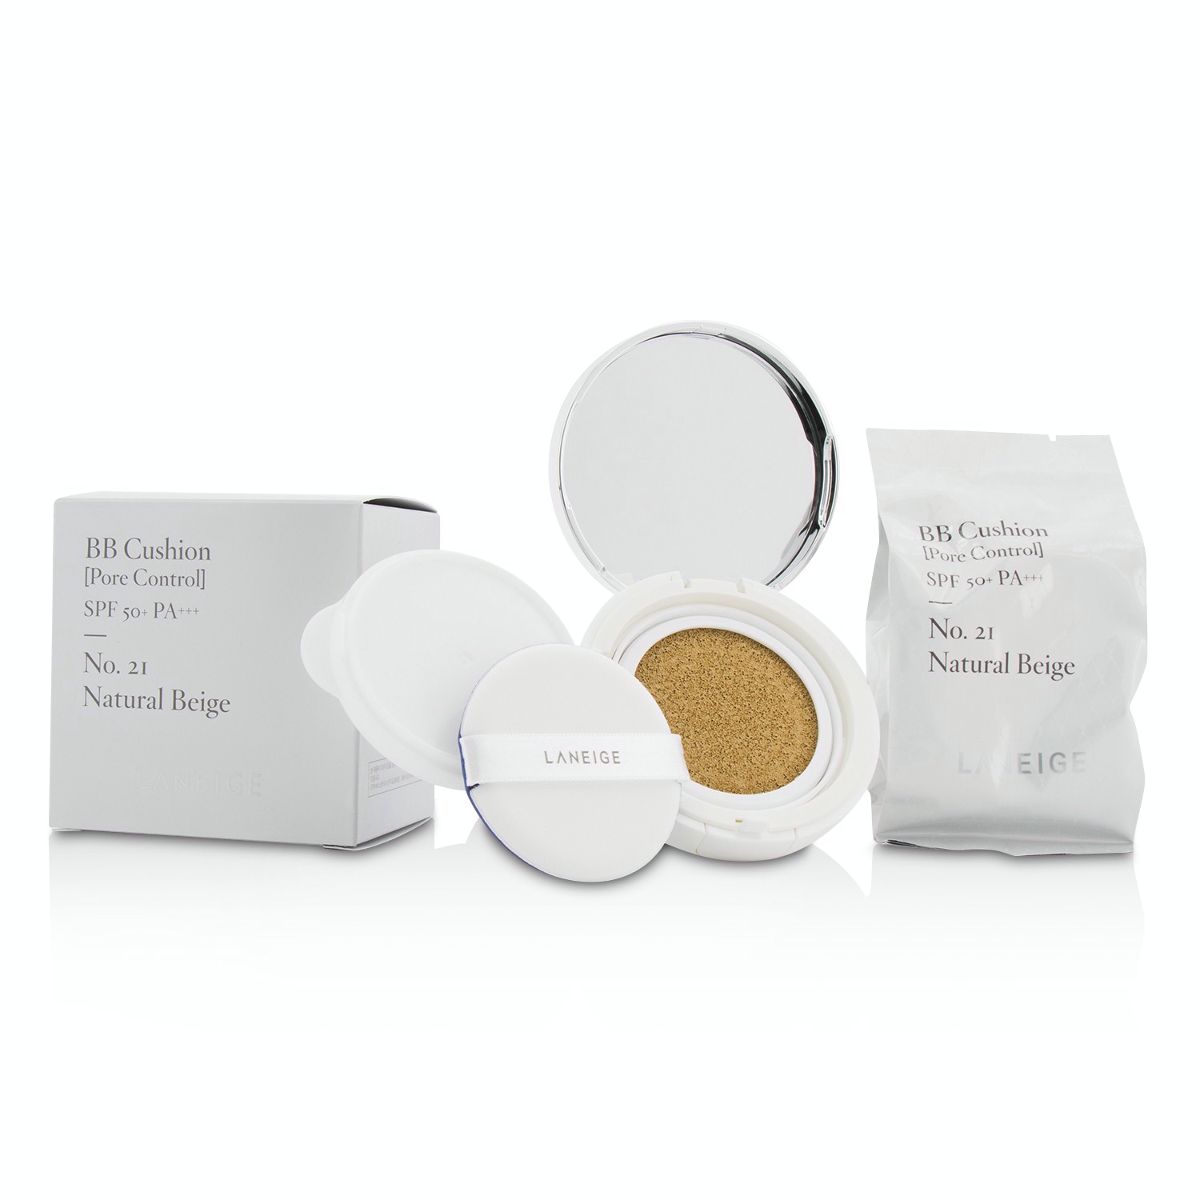 BB Cushion Foundation (Pore Control) SPF 50 With Extra Refill - # 21 Natural Beige Laneige Image